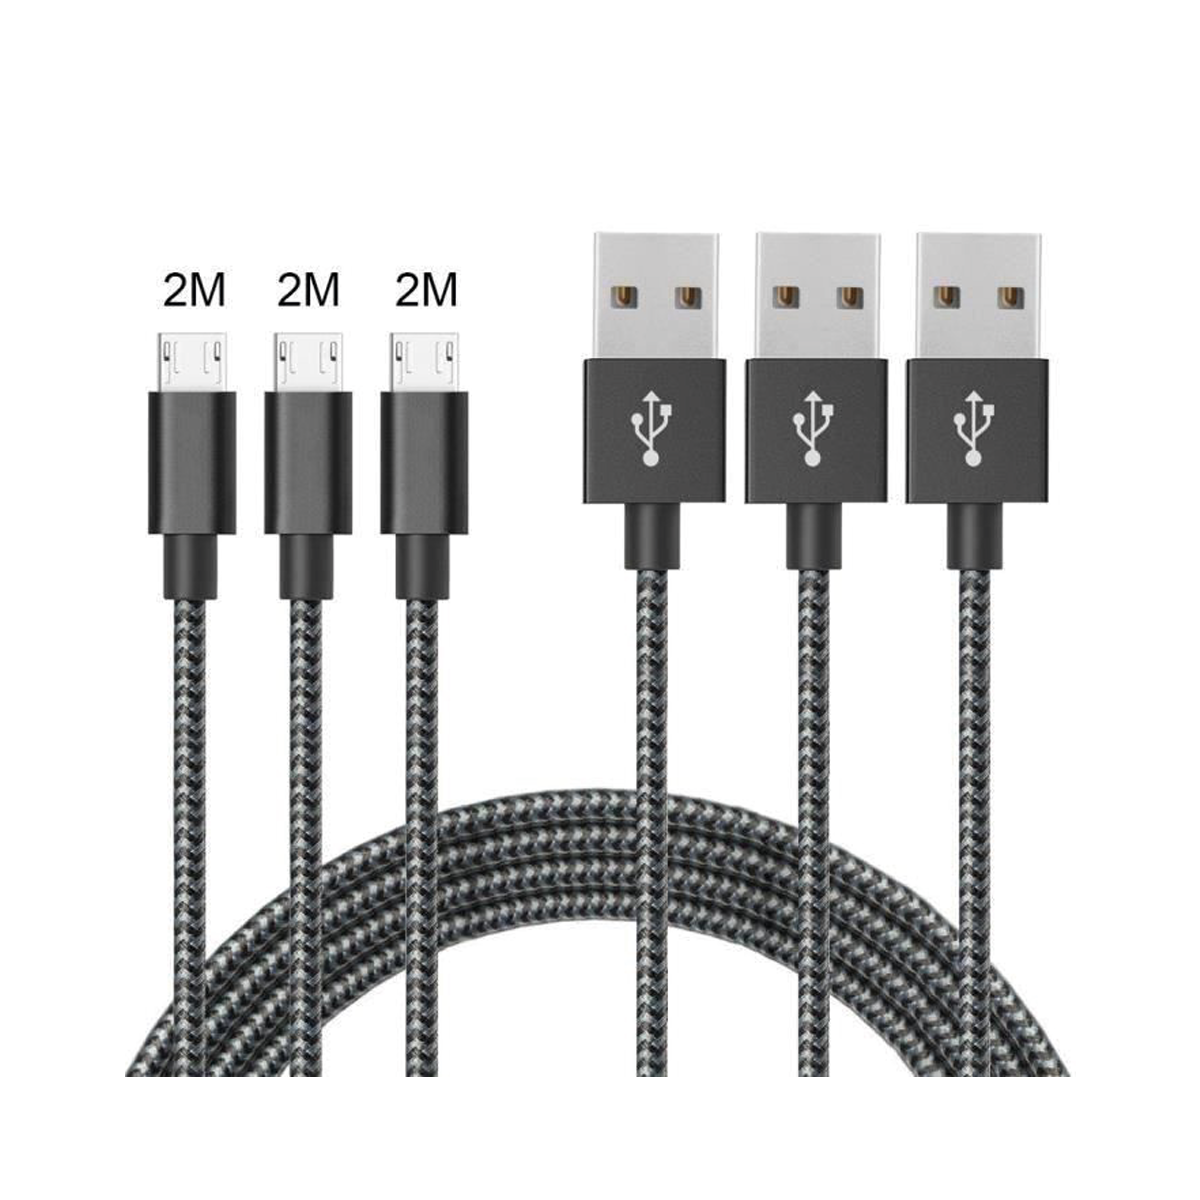 3 Câbles Micro USB 2M,Micro Câble Chargeur USB Compatible Samsung Galaxy S7 Edge S6 S5 S4 S3, Note 5,WIKO,ASUS,HUAWEI,HTC,LG (No